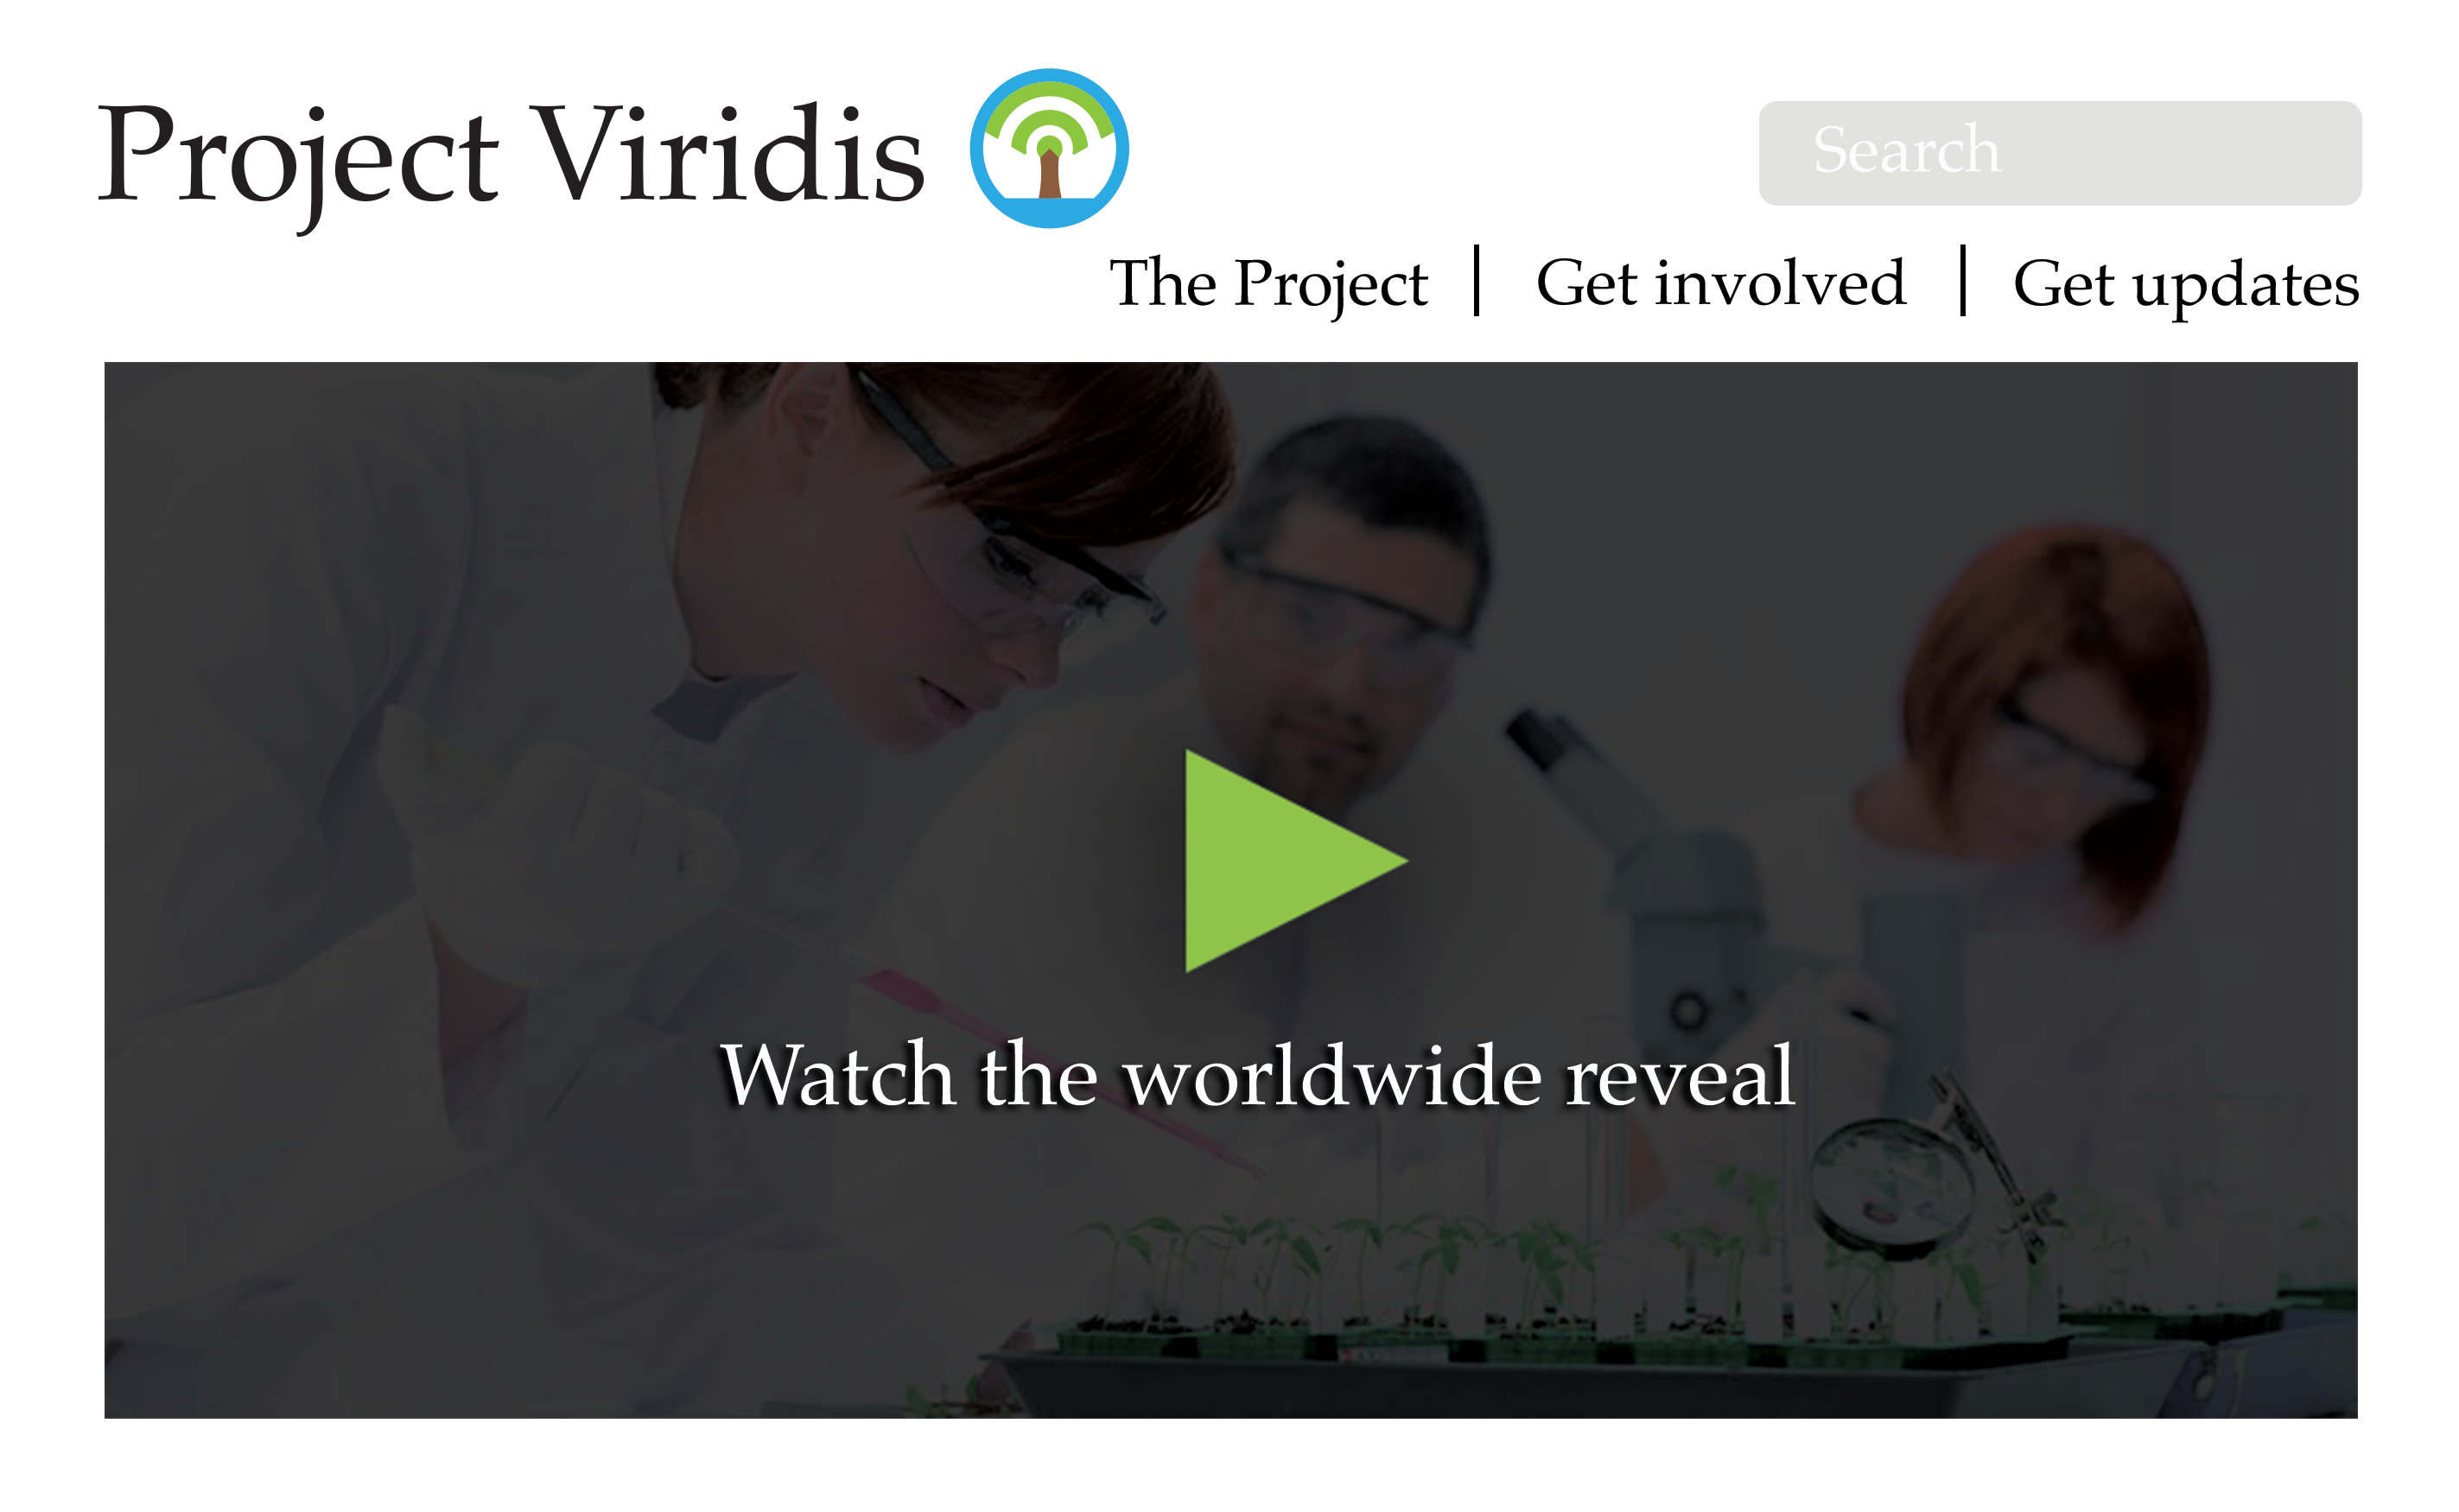 Project Viridis - a spoof product launch - culture jamming by Dominic Celica